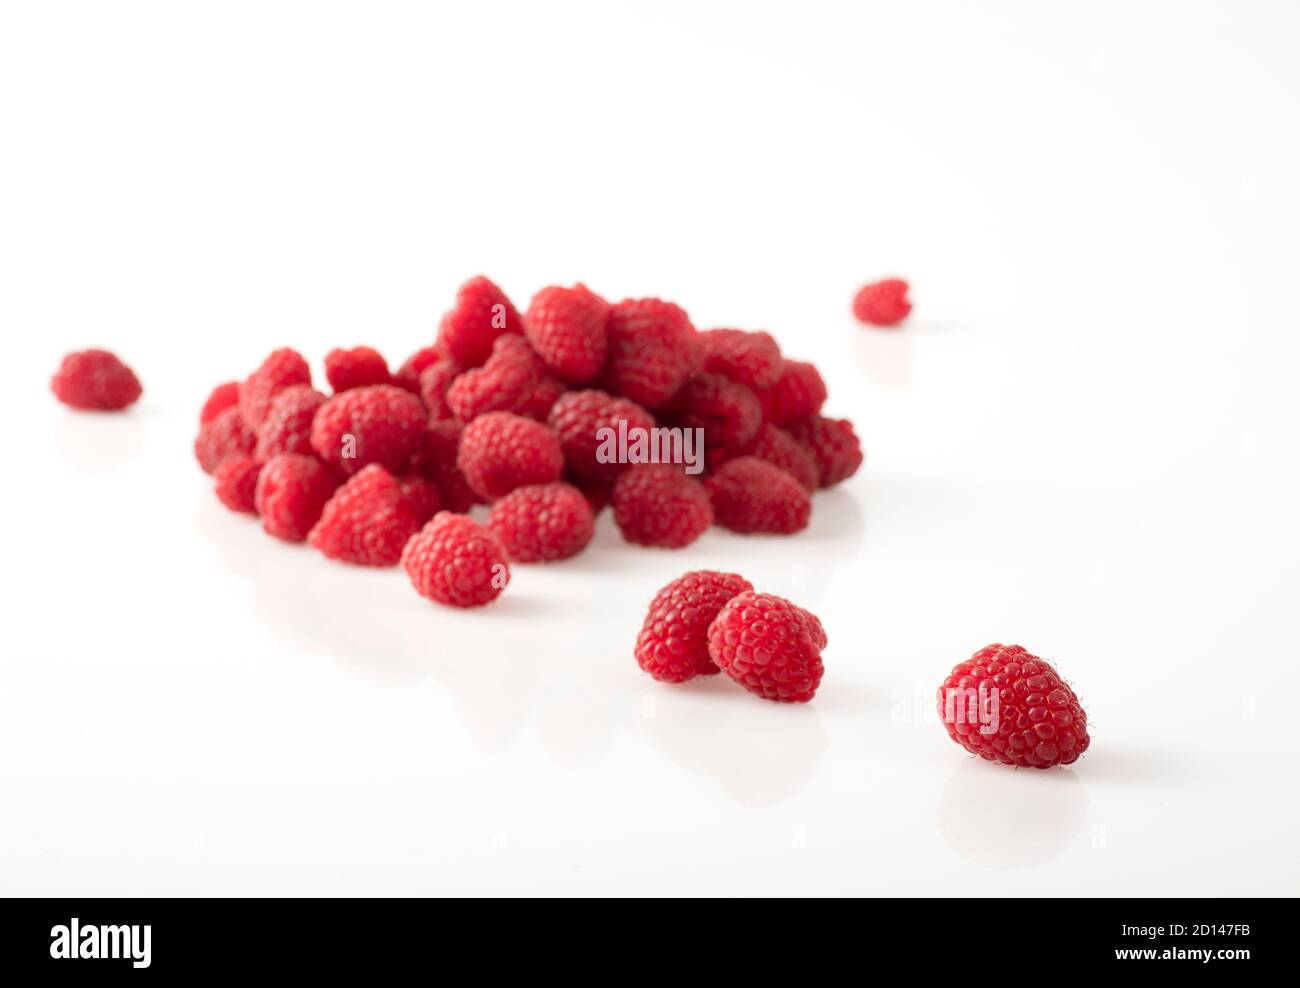 Fresh raspberries placed on a white, shiny background. Stock Photo